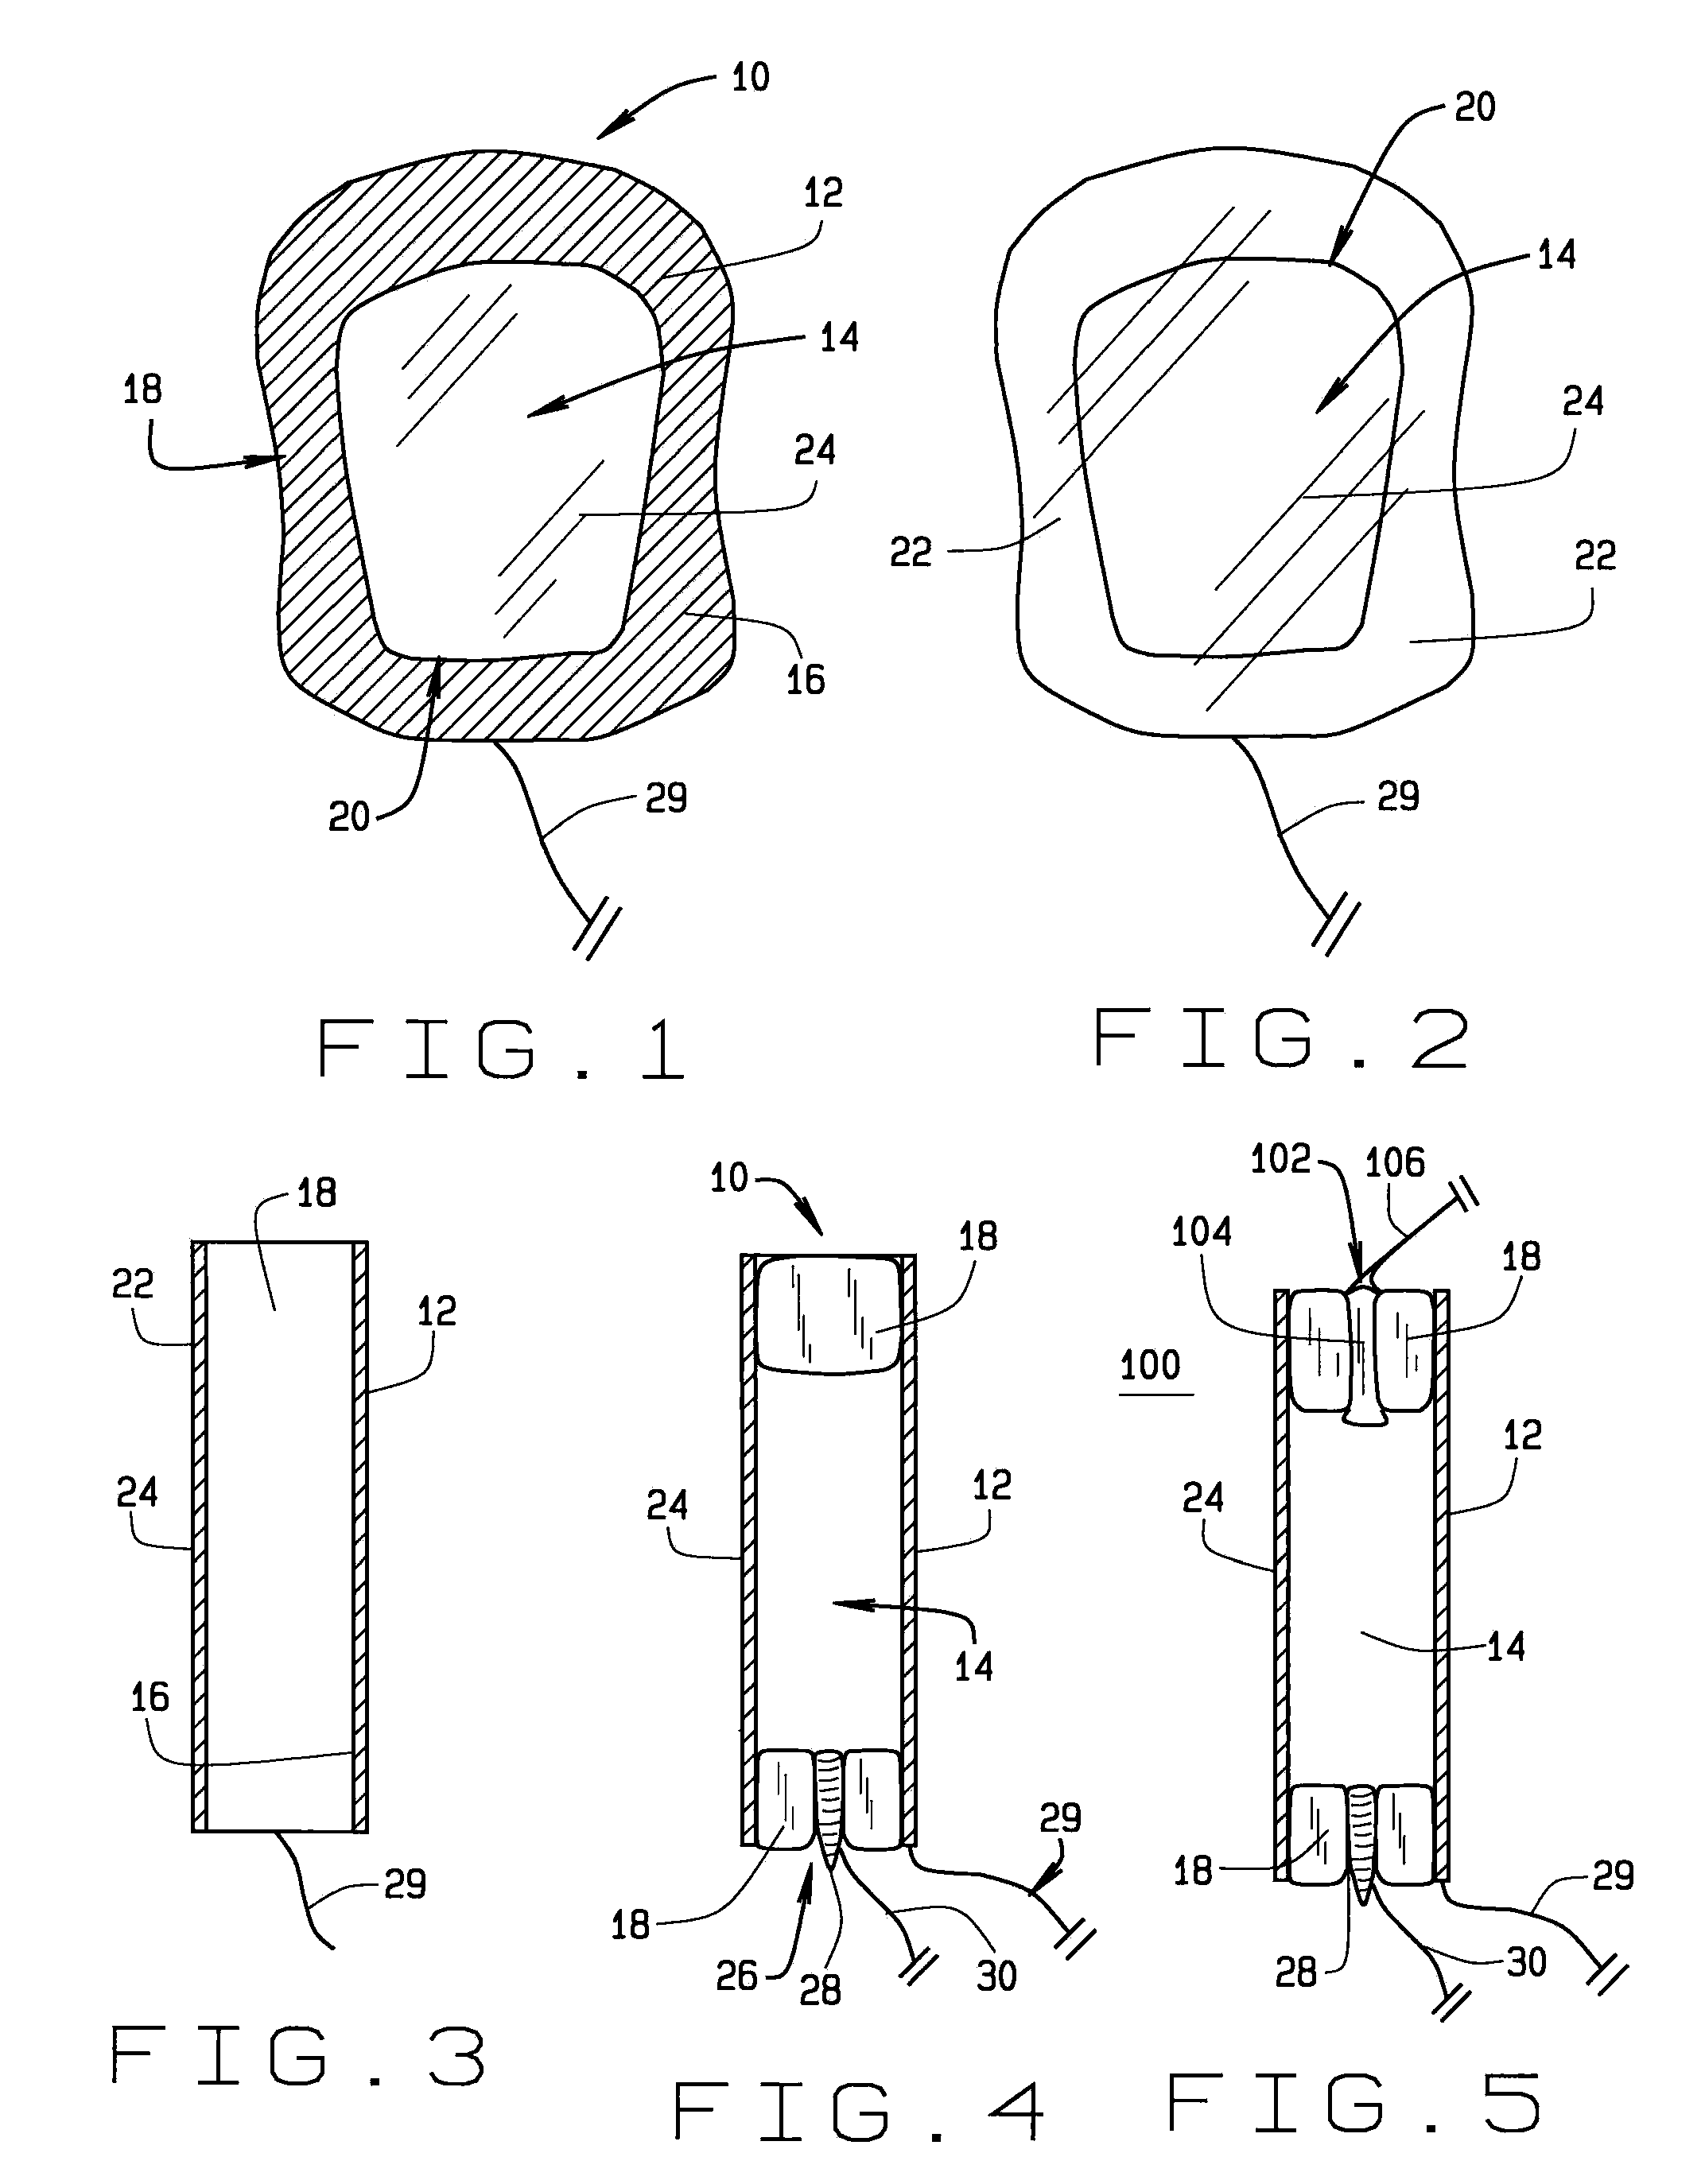 Apparatus for evoking and recording bio-potentials